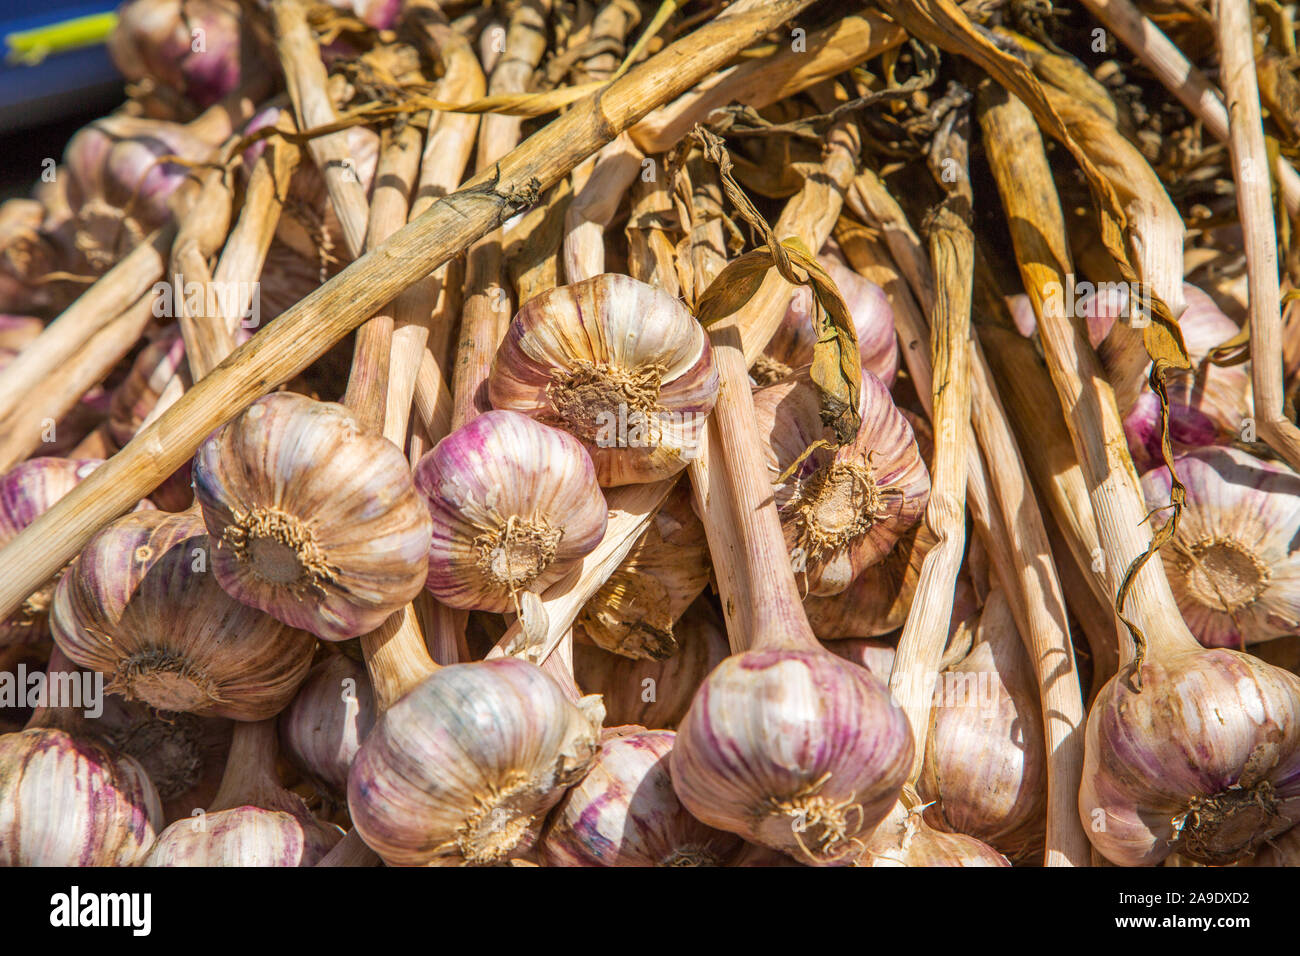 Garlic displayed at the open air market in Arles France Stock Photo